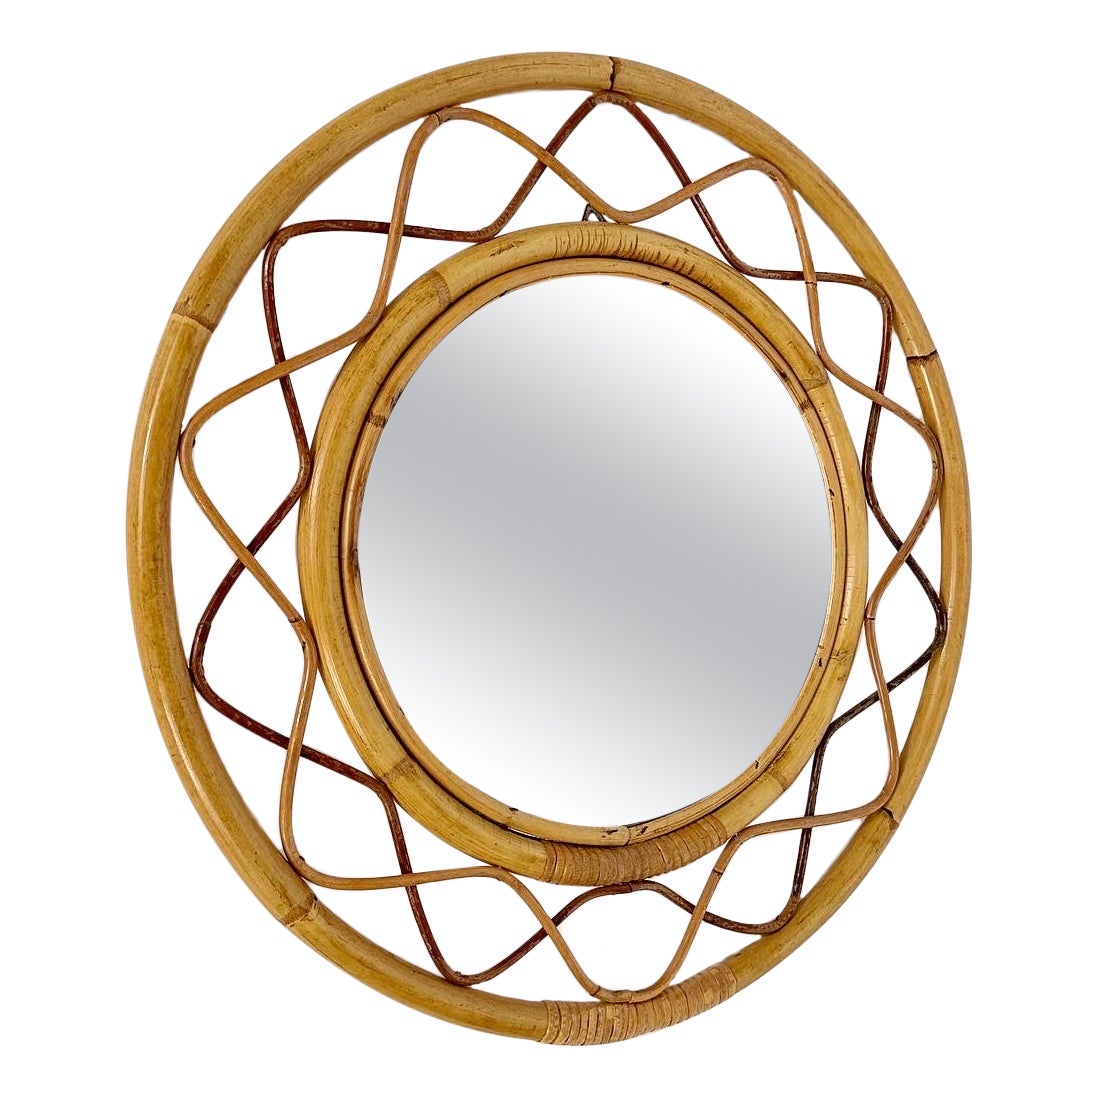 Swedish Bamboo Mirror Ornamental Frame 1950s In the Style of Josef Frank 